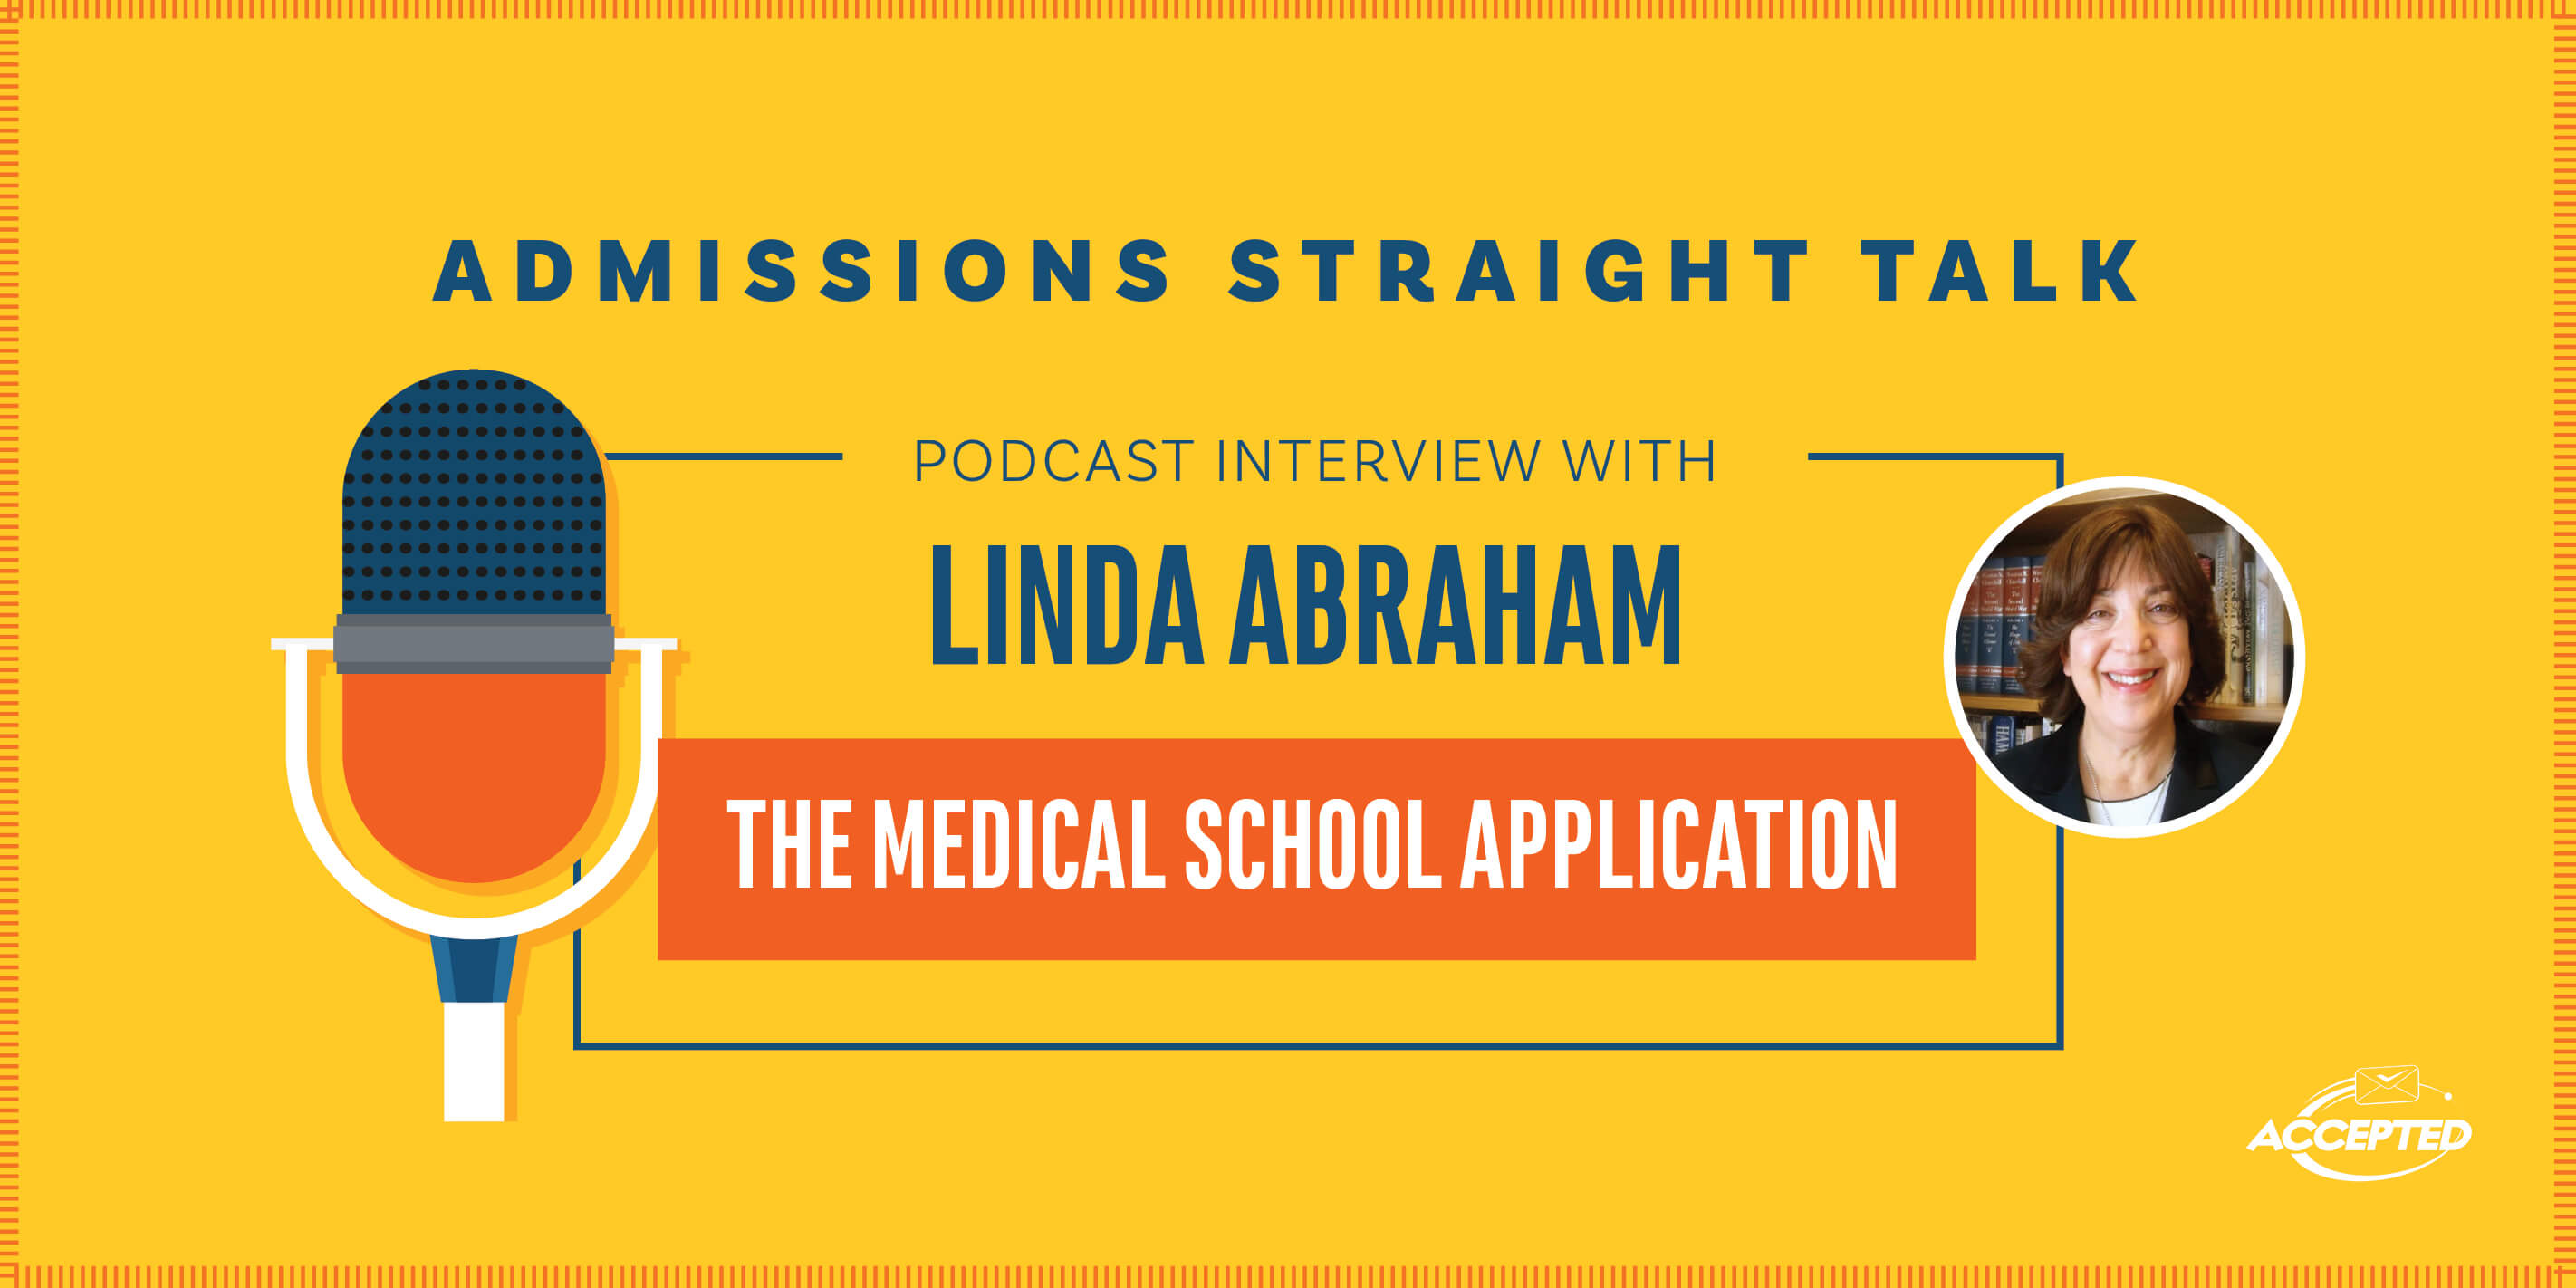 Linda Abraham talks about the med school application. Listen now!